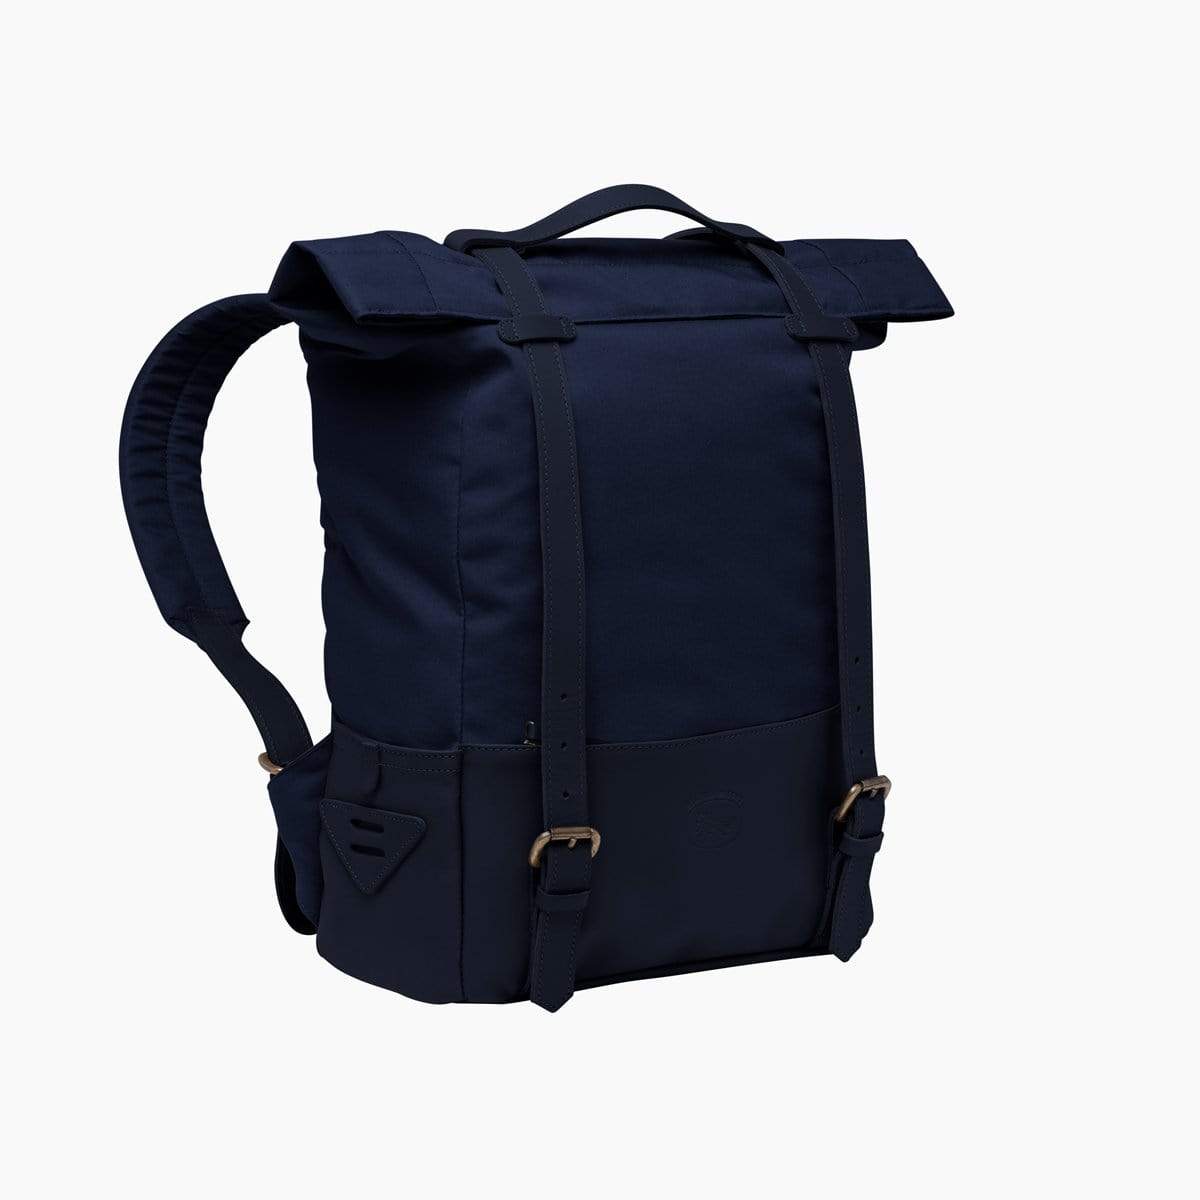 Beatnik & Sons Leather backpacks the Terry backpack